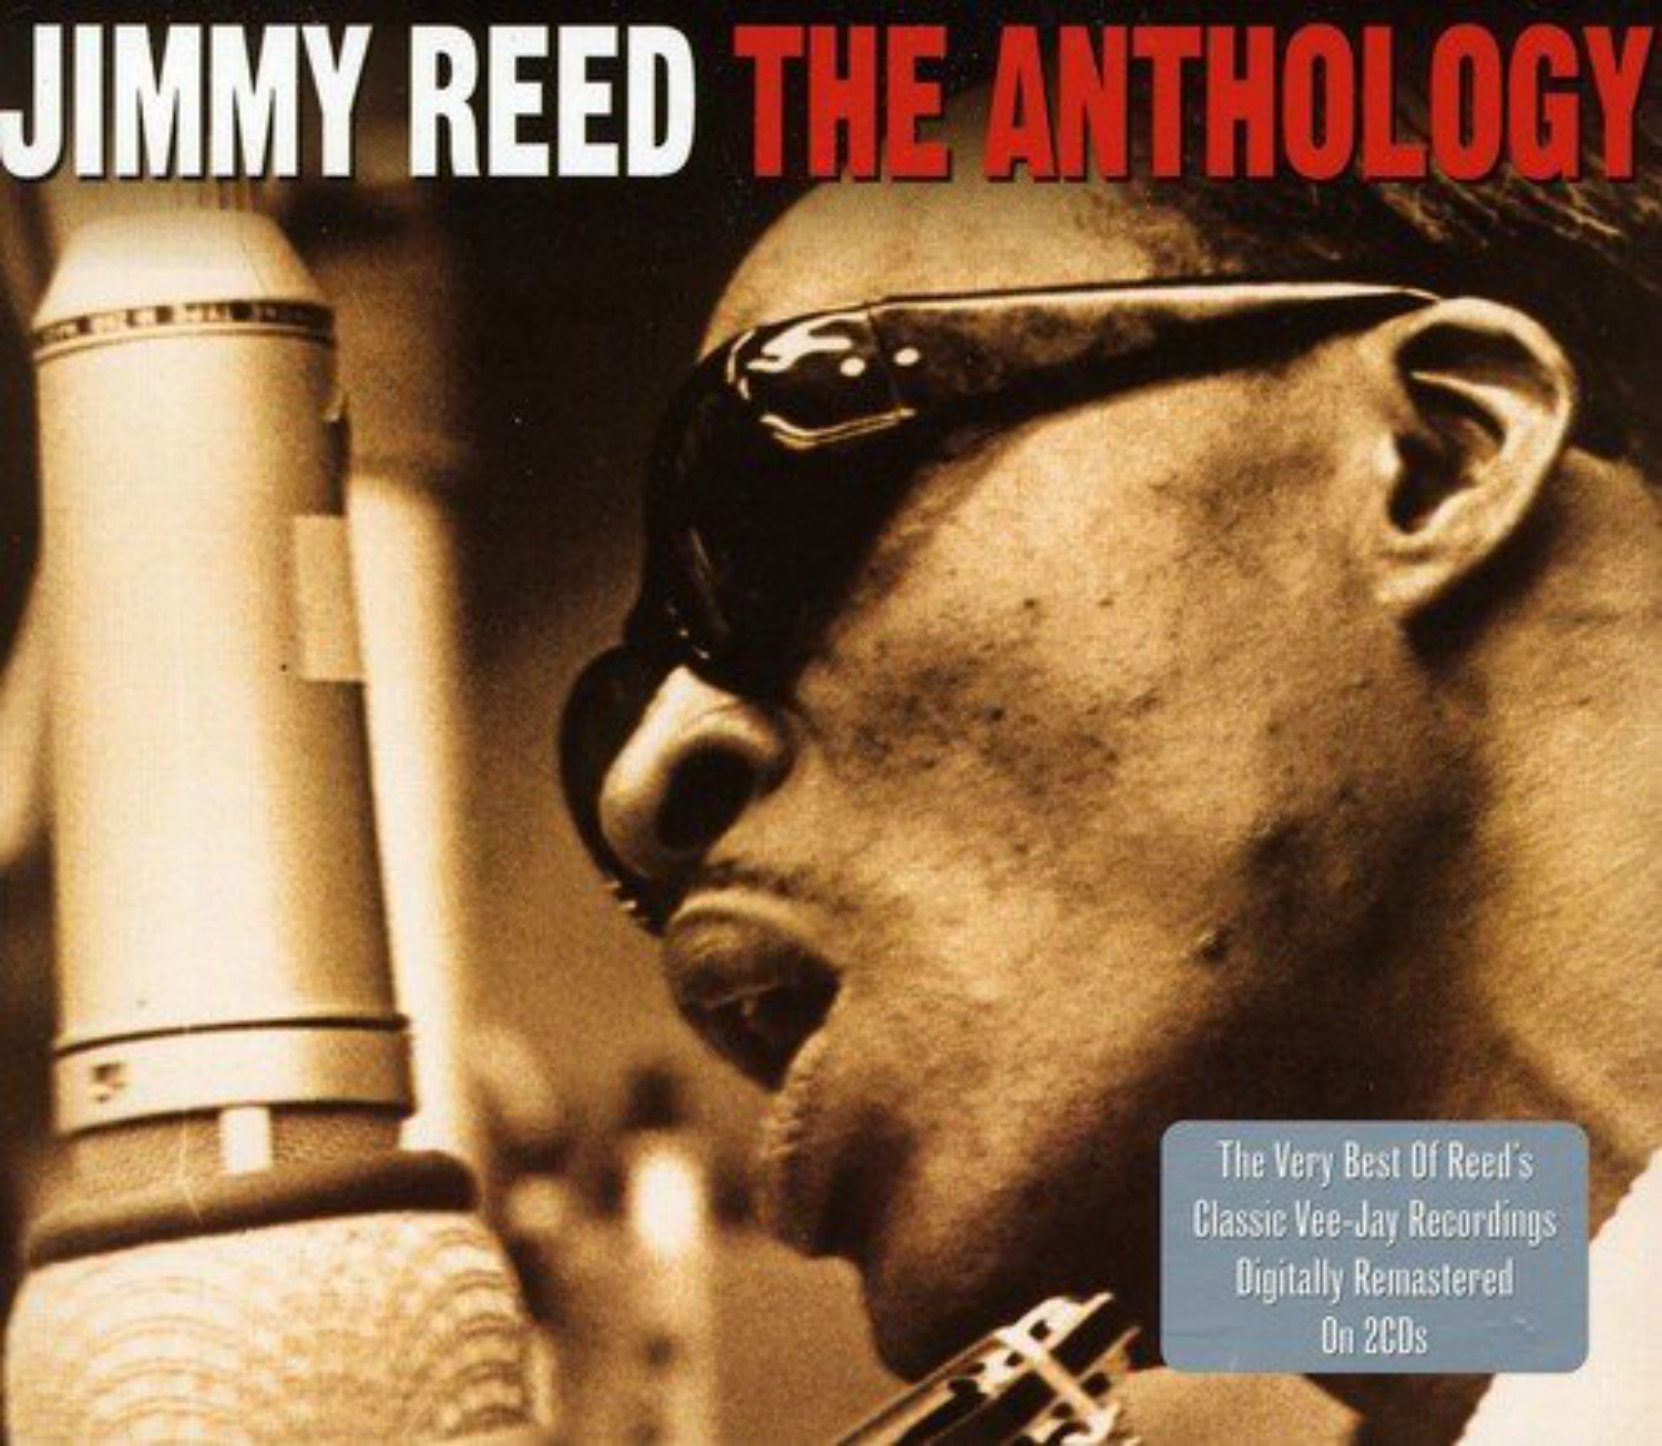 CD cover, Jimmy Reed, The Anthology, released on the Not Now Music label